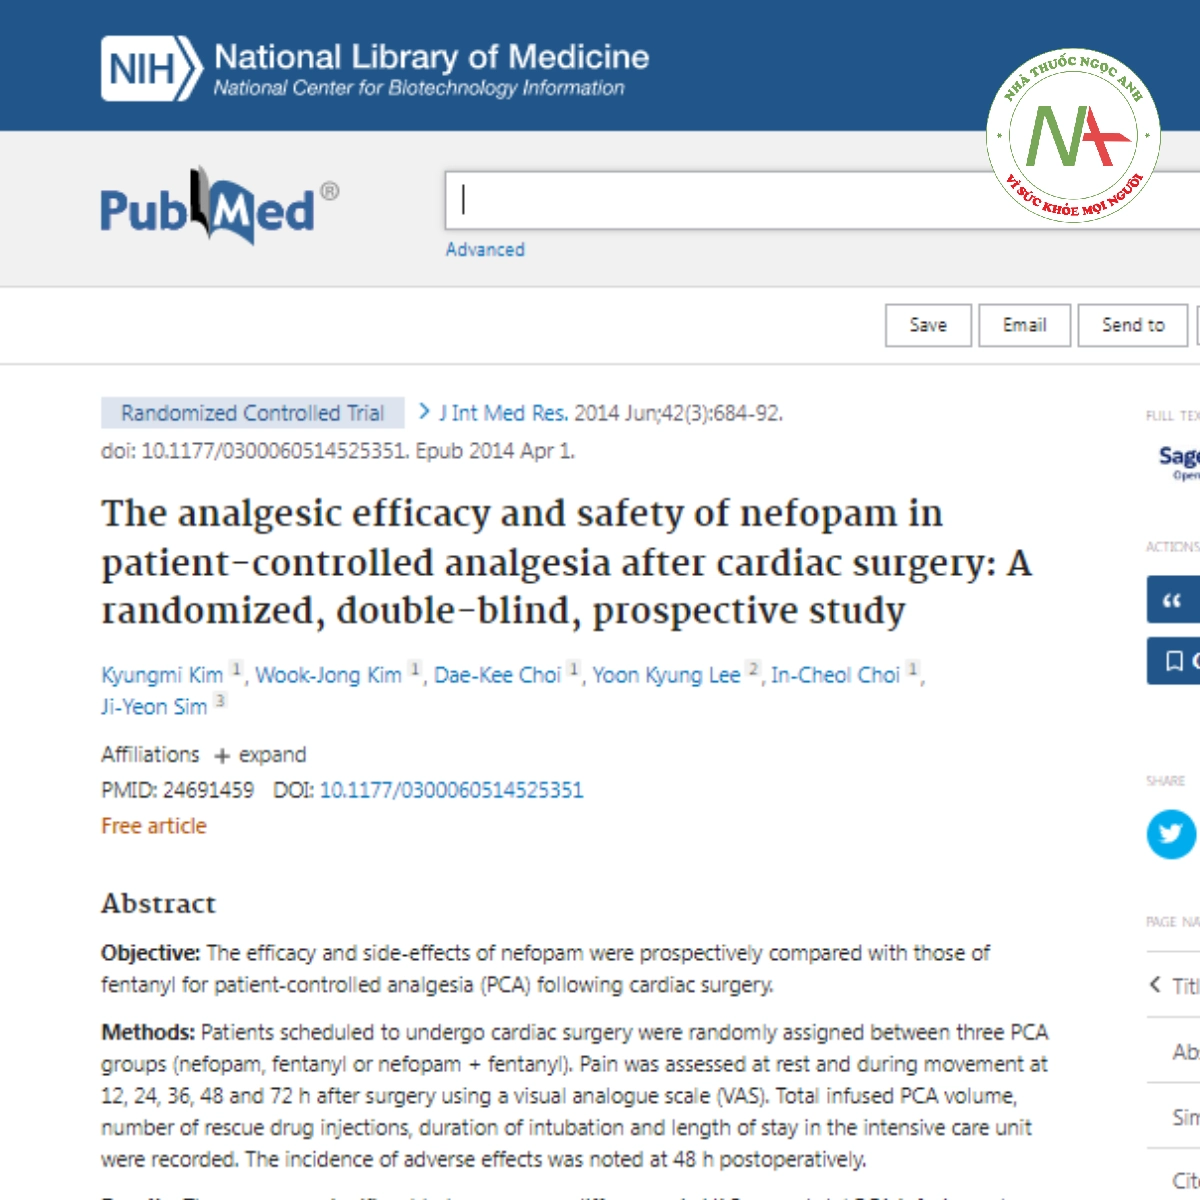 The analgesic efficacy and safety of nefopam in patient-controlled analgesia after cardiac surgery_ A randomized, double-blind, prospective study